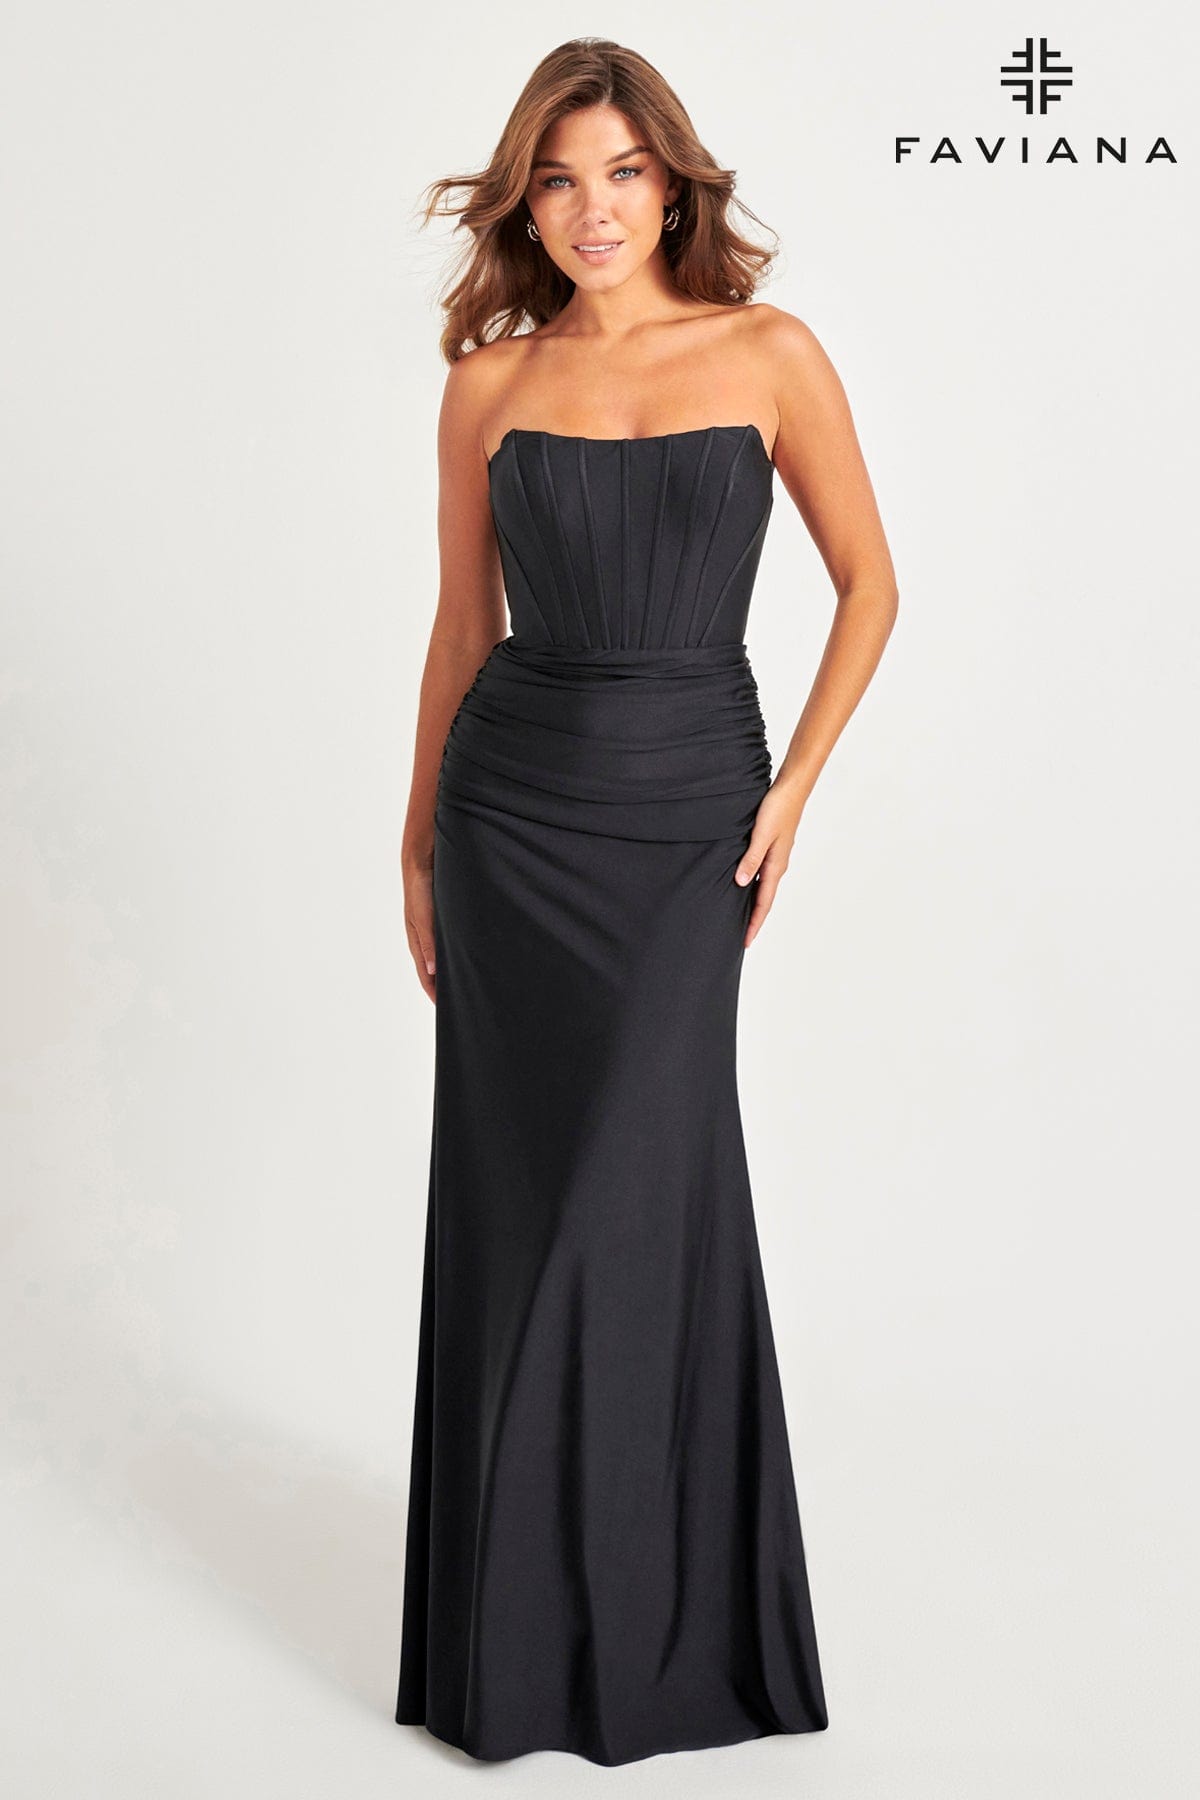 Sleek Black Strapless Formal Gown With Corset Boning And Ruching | 11041